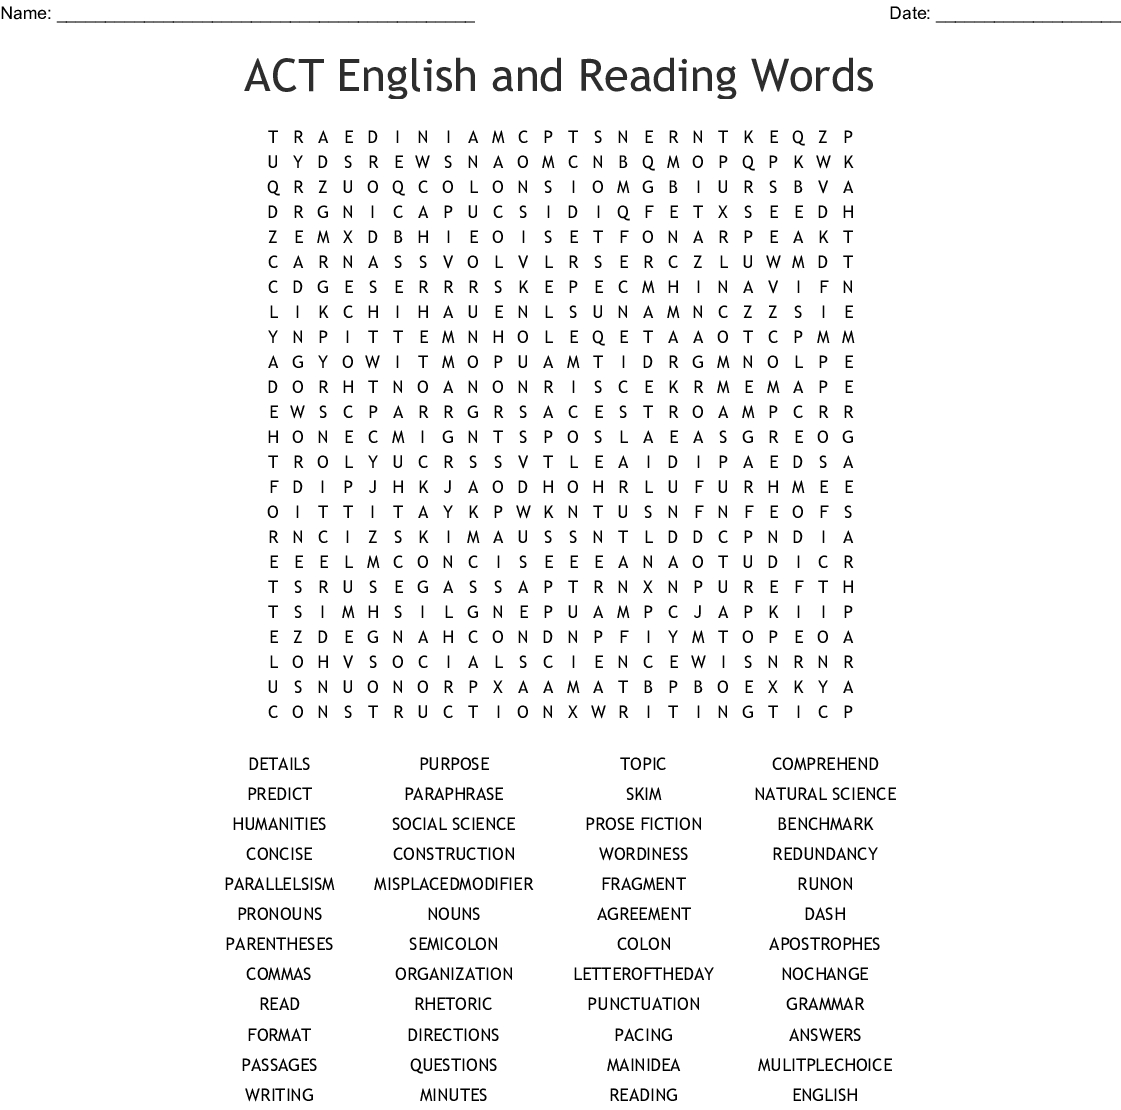 what-is-the-act-test